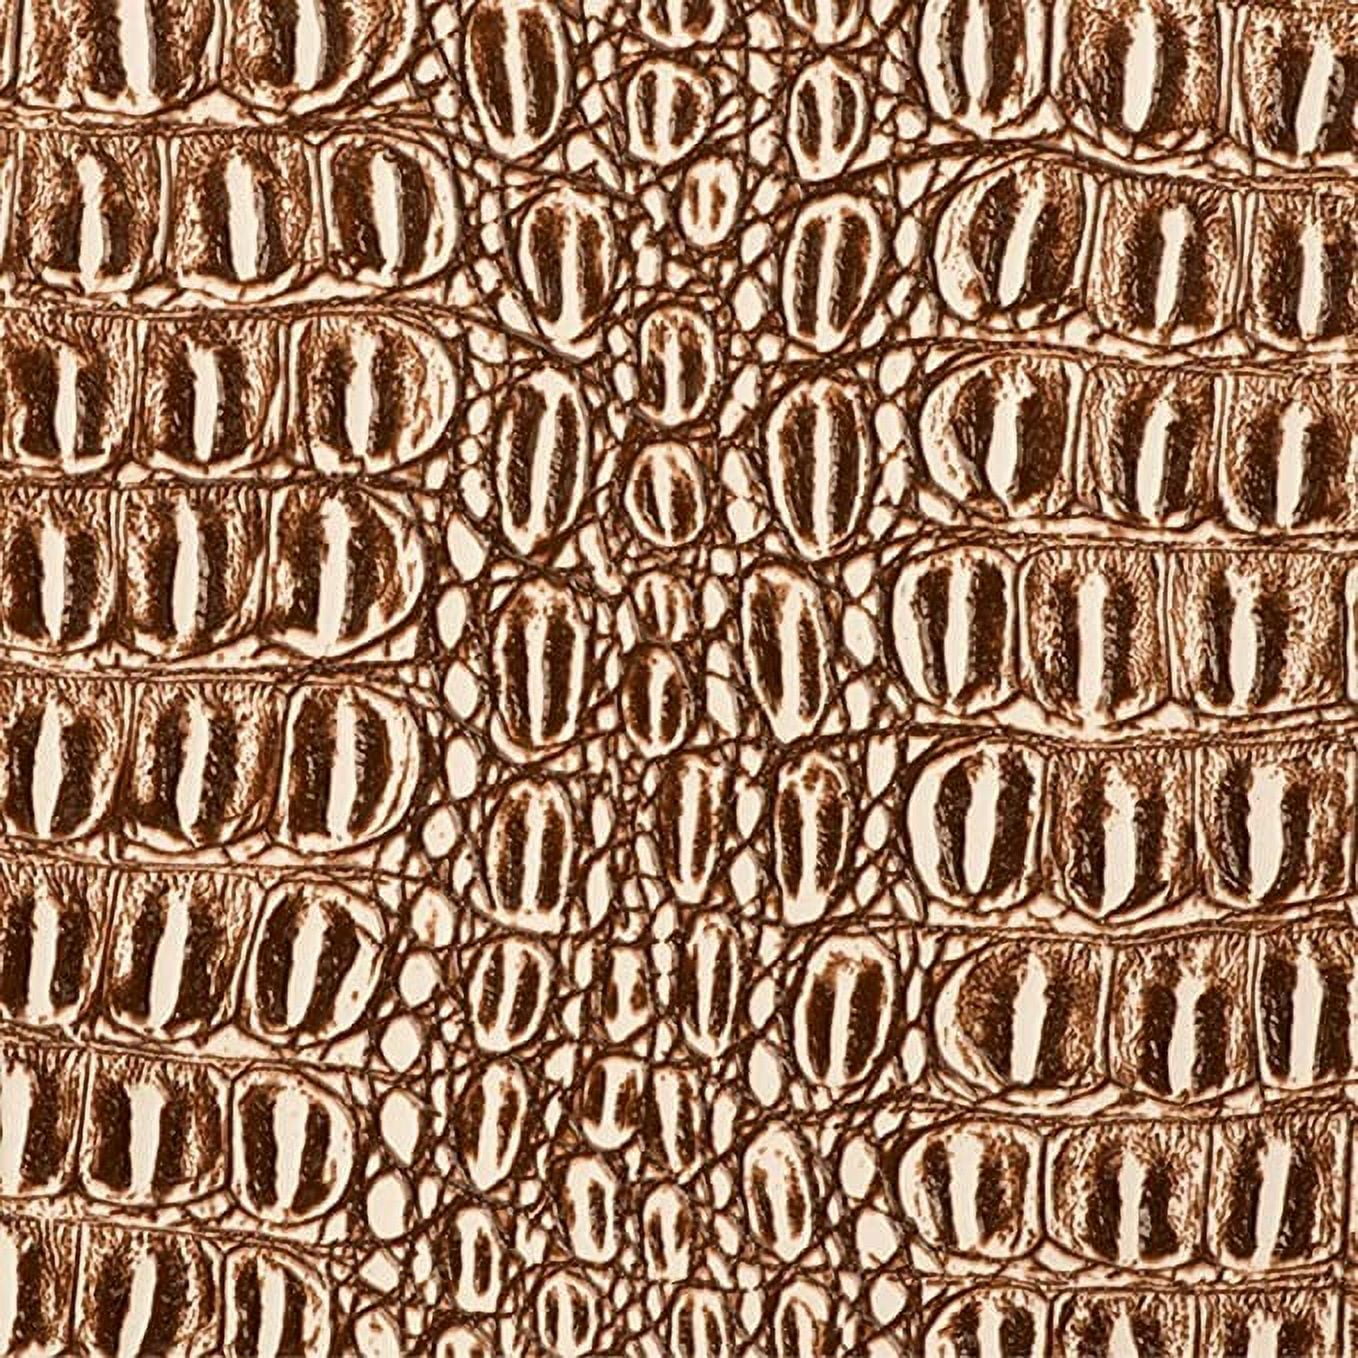 PINK - Glossy Faux Snake Skin Upholstery Vinyl Fabric, CROCCO, BTY